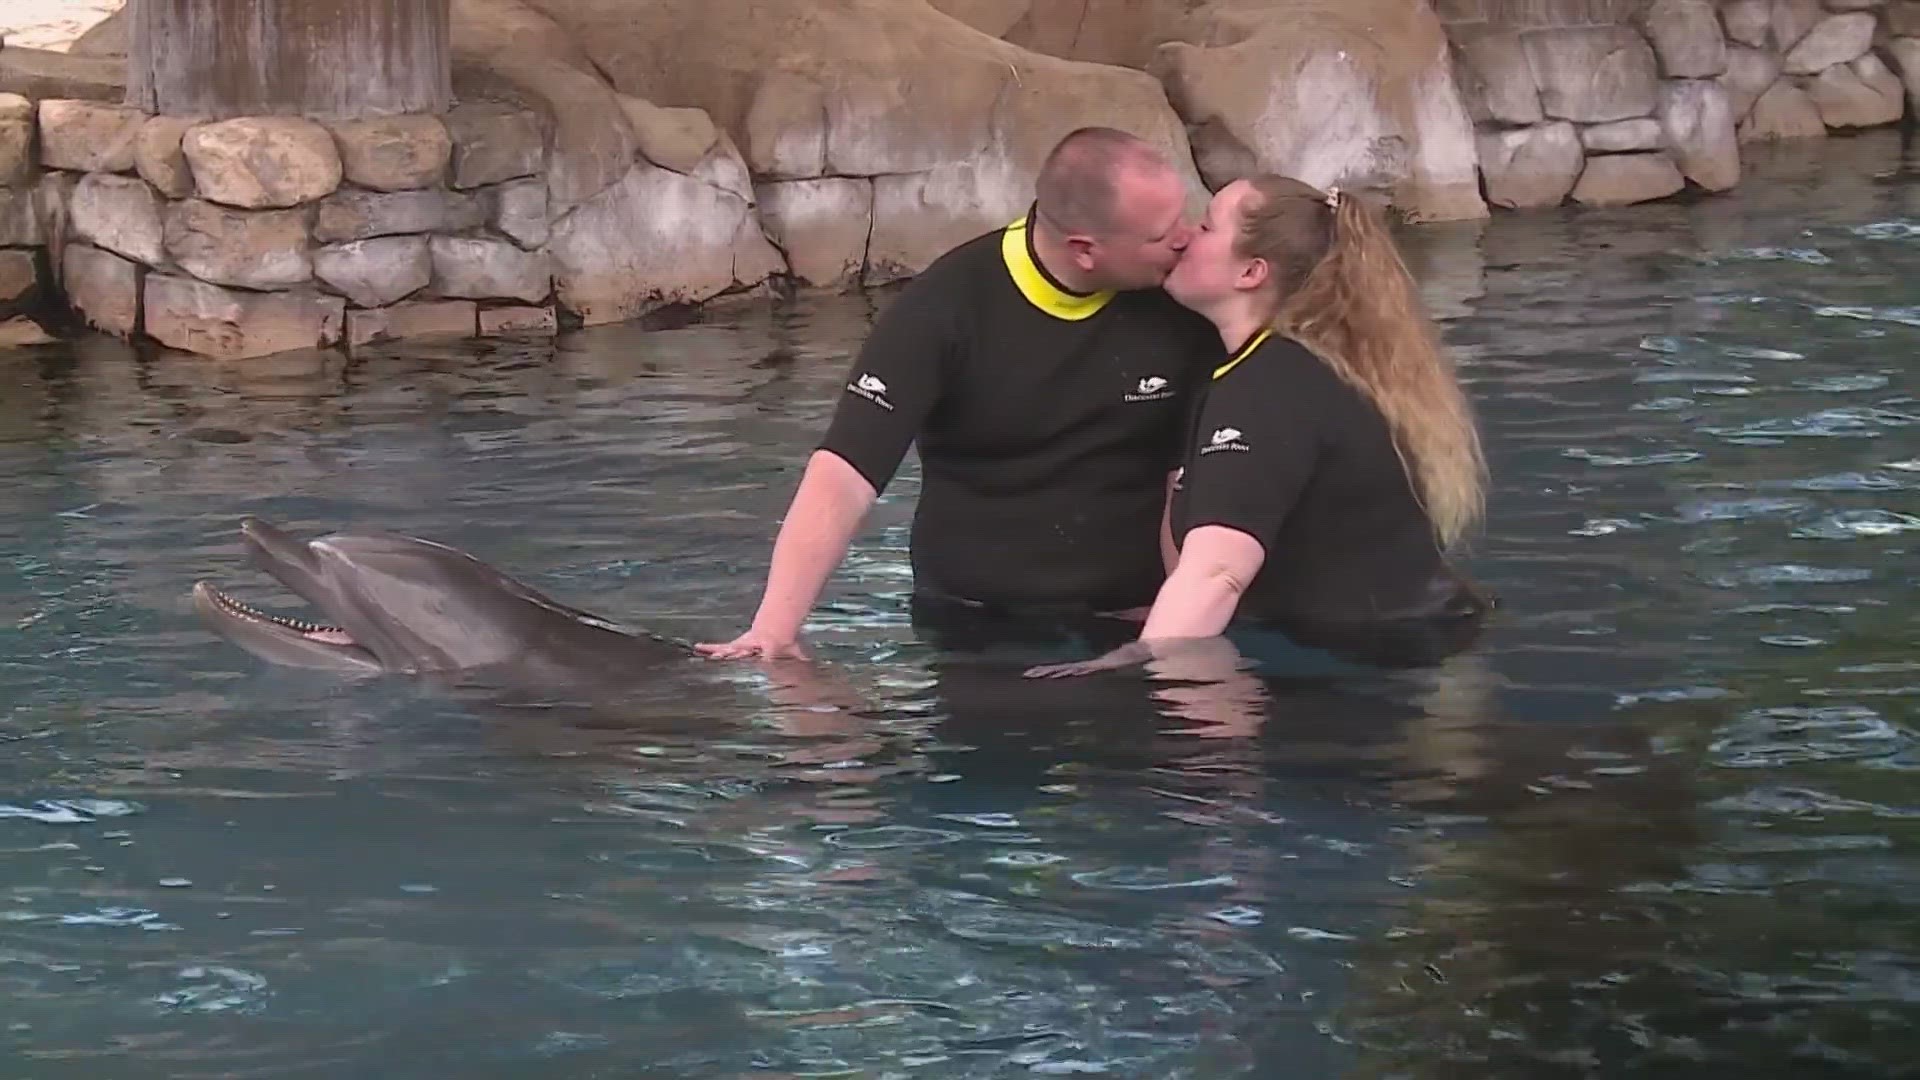 This was the bride's first time visiting SeaWorld.